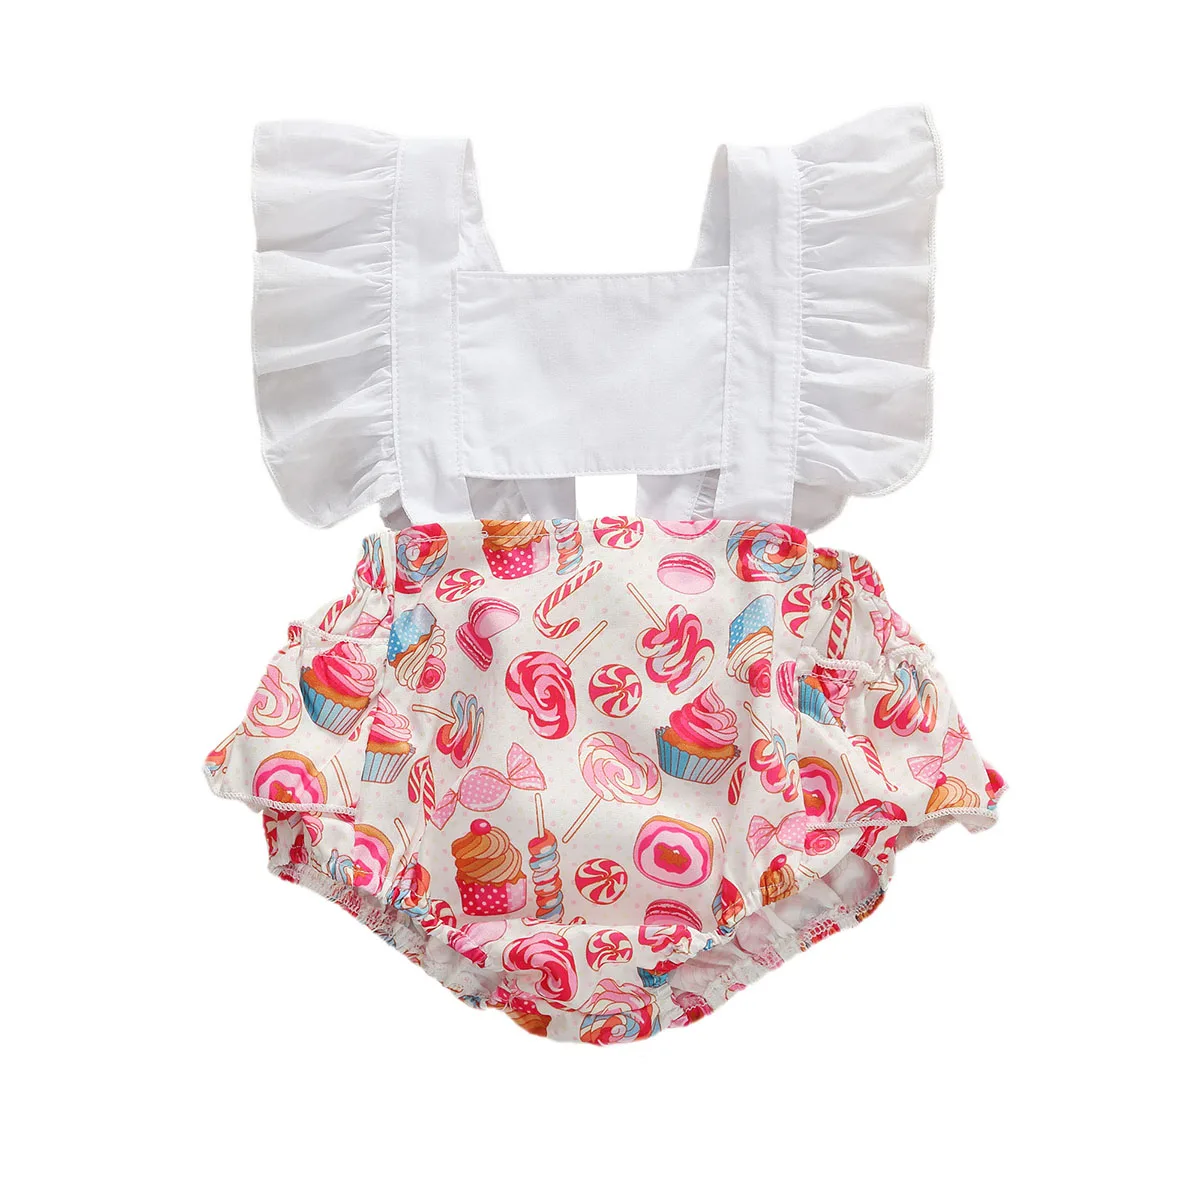 customised baby bodysuits Ma&Baby 3pcs/pack Newborn Infant Baby Girls Rompers Cute Overalls Ruffles Donuts Flower Print Jumpsuit 3 pieces 0-24M DD43 cool baby bodysuits	